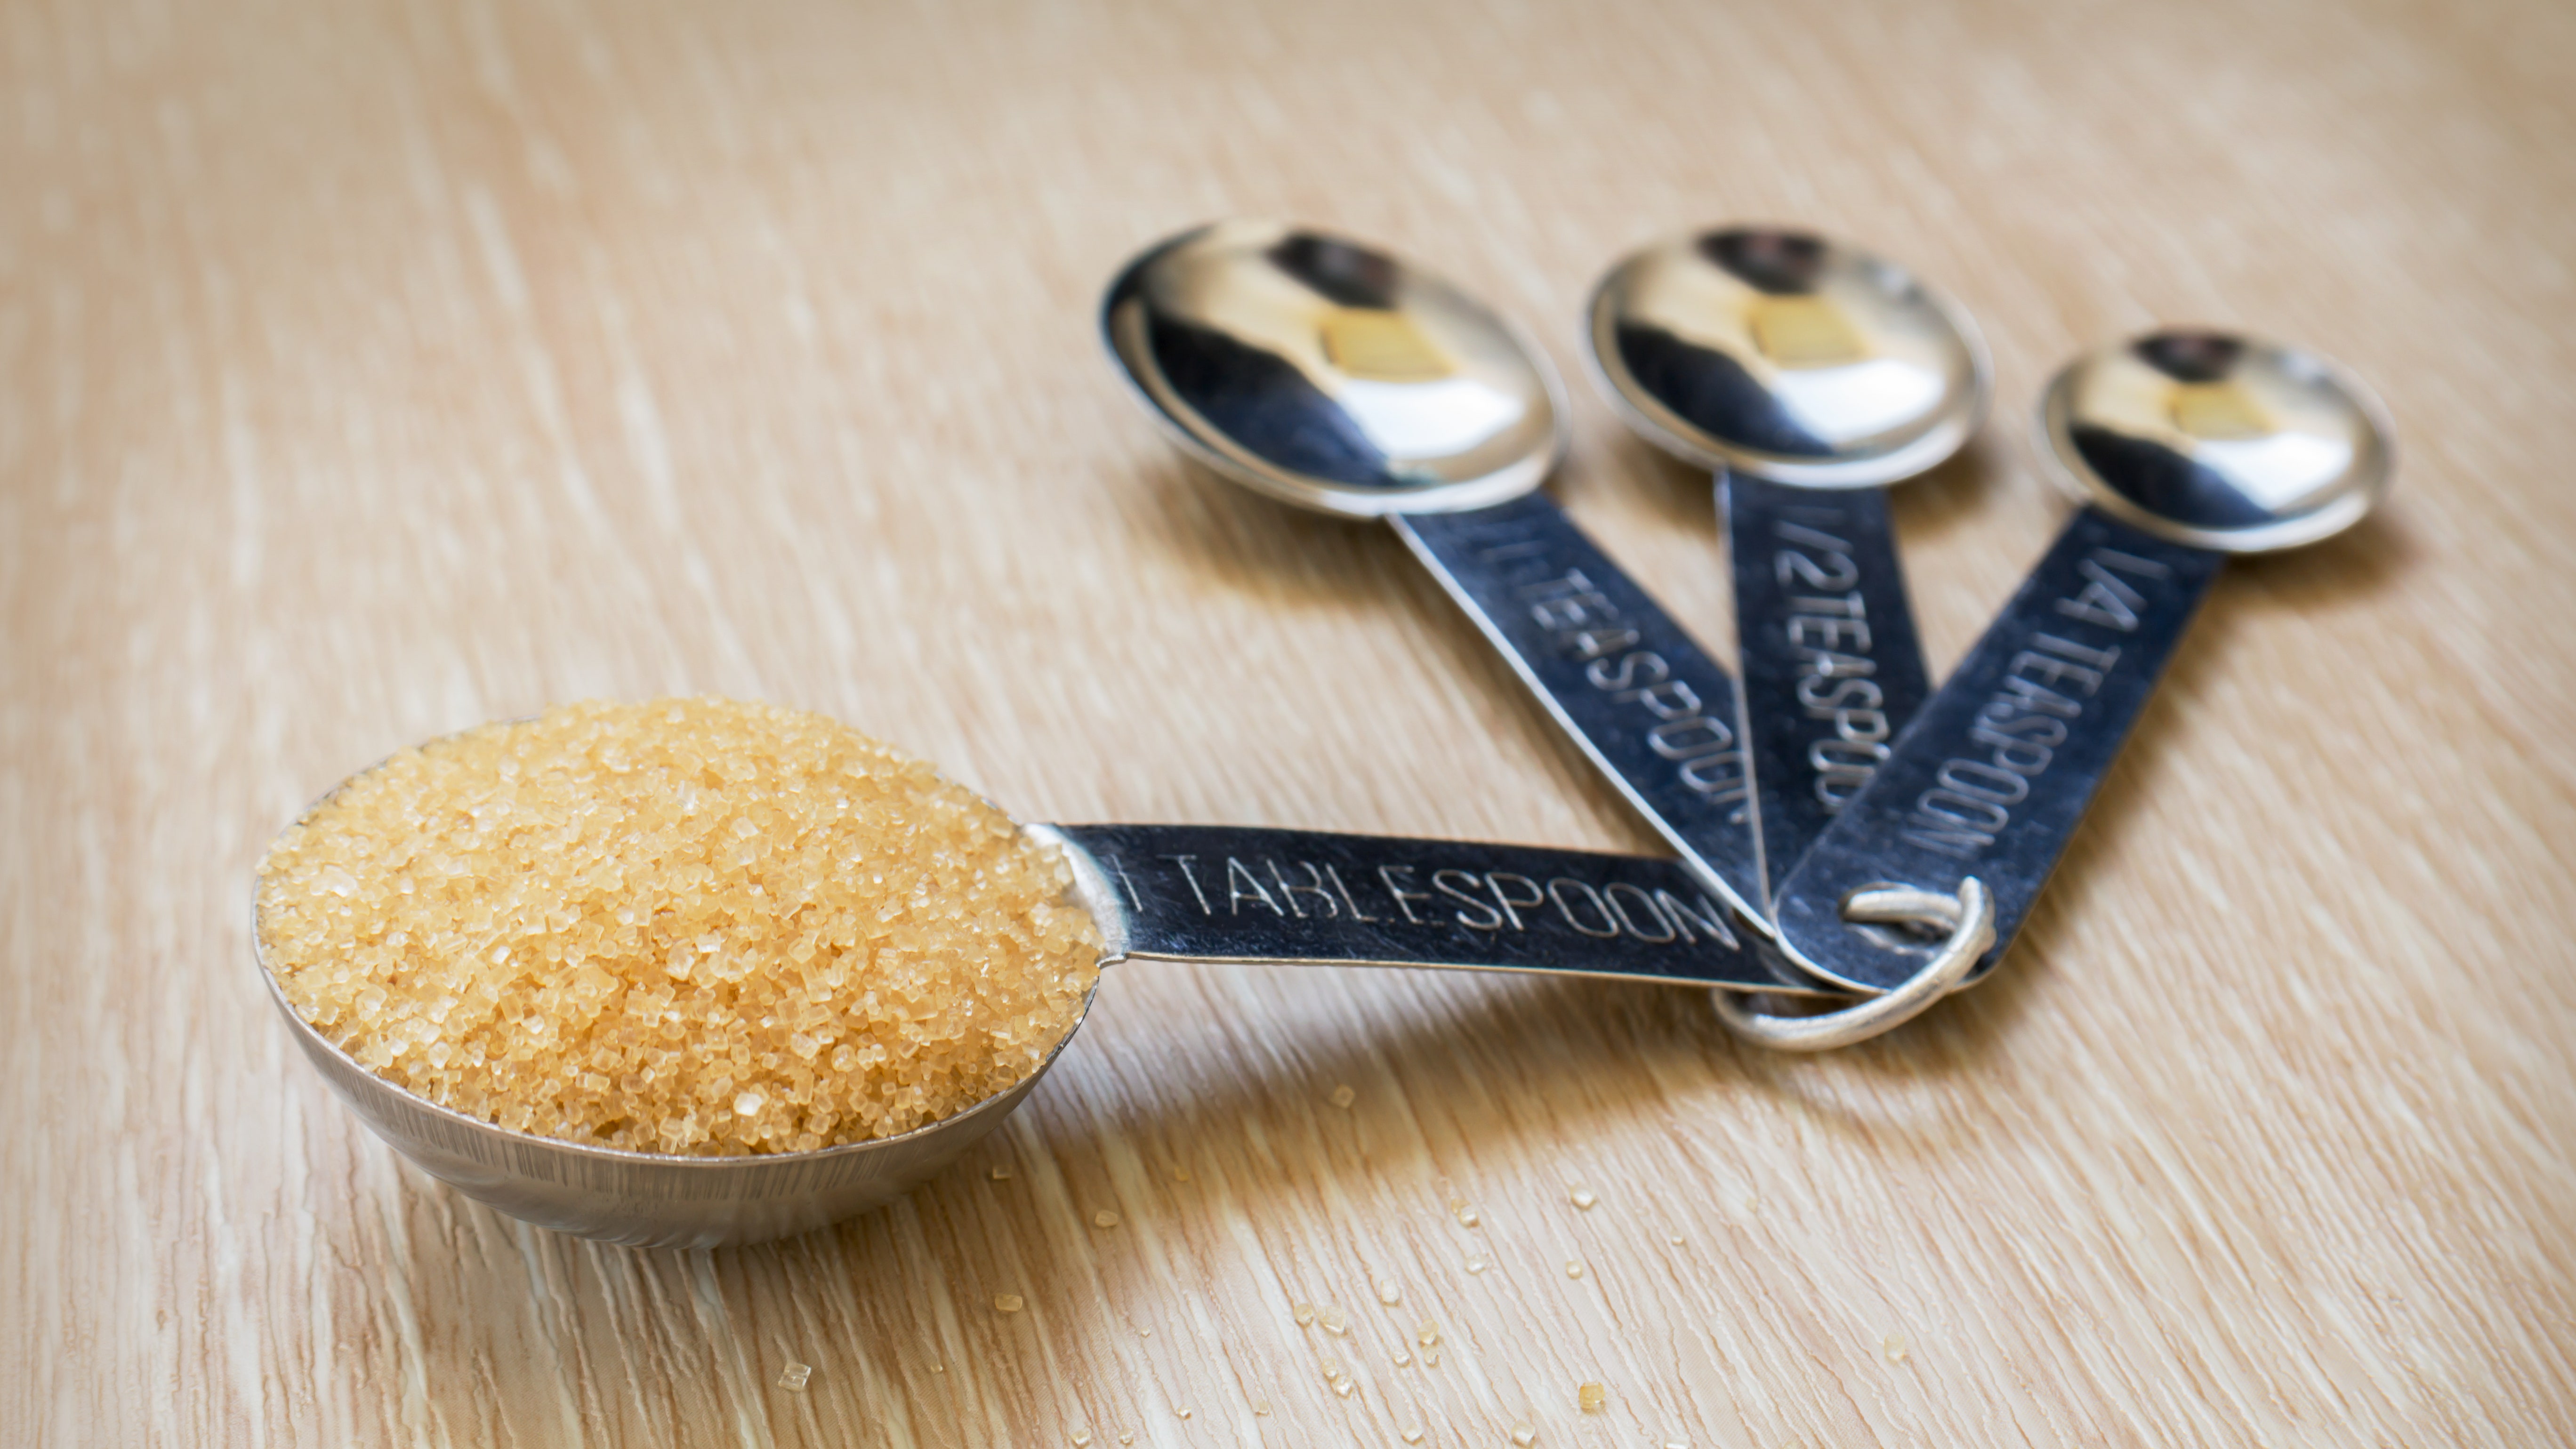 The 9 Best Sugar Substitutes for People With Type 2 Diabetes